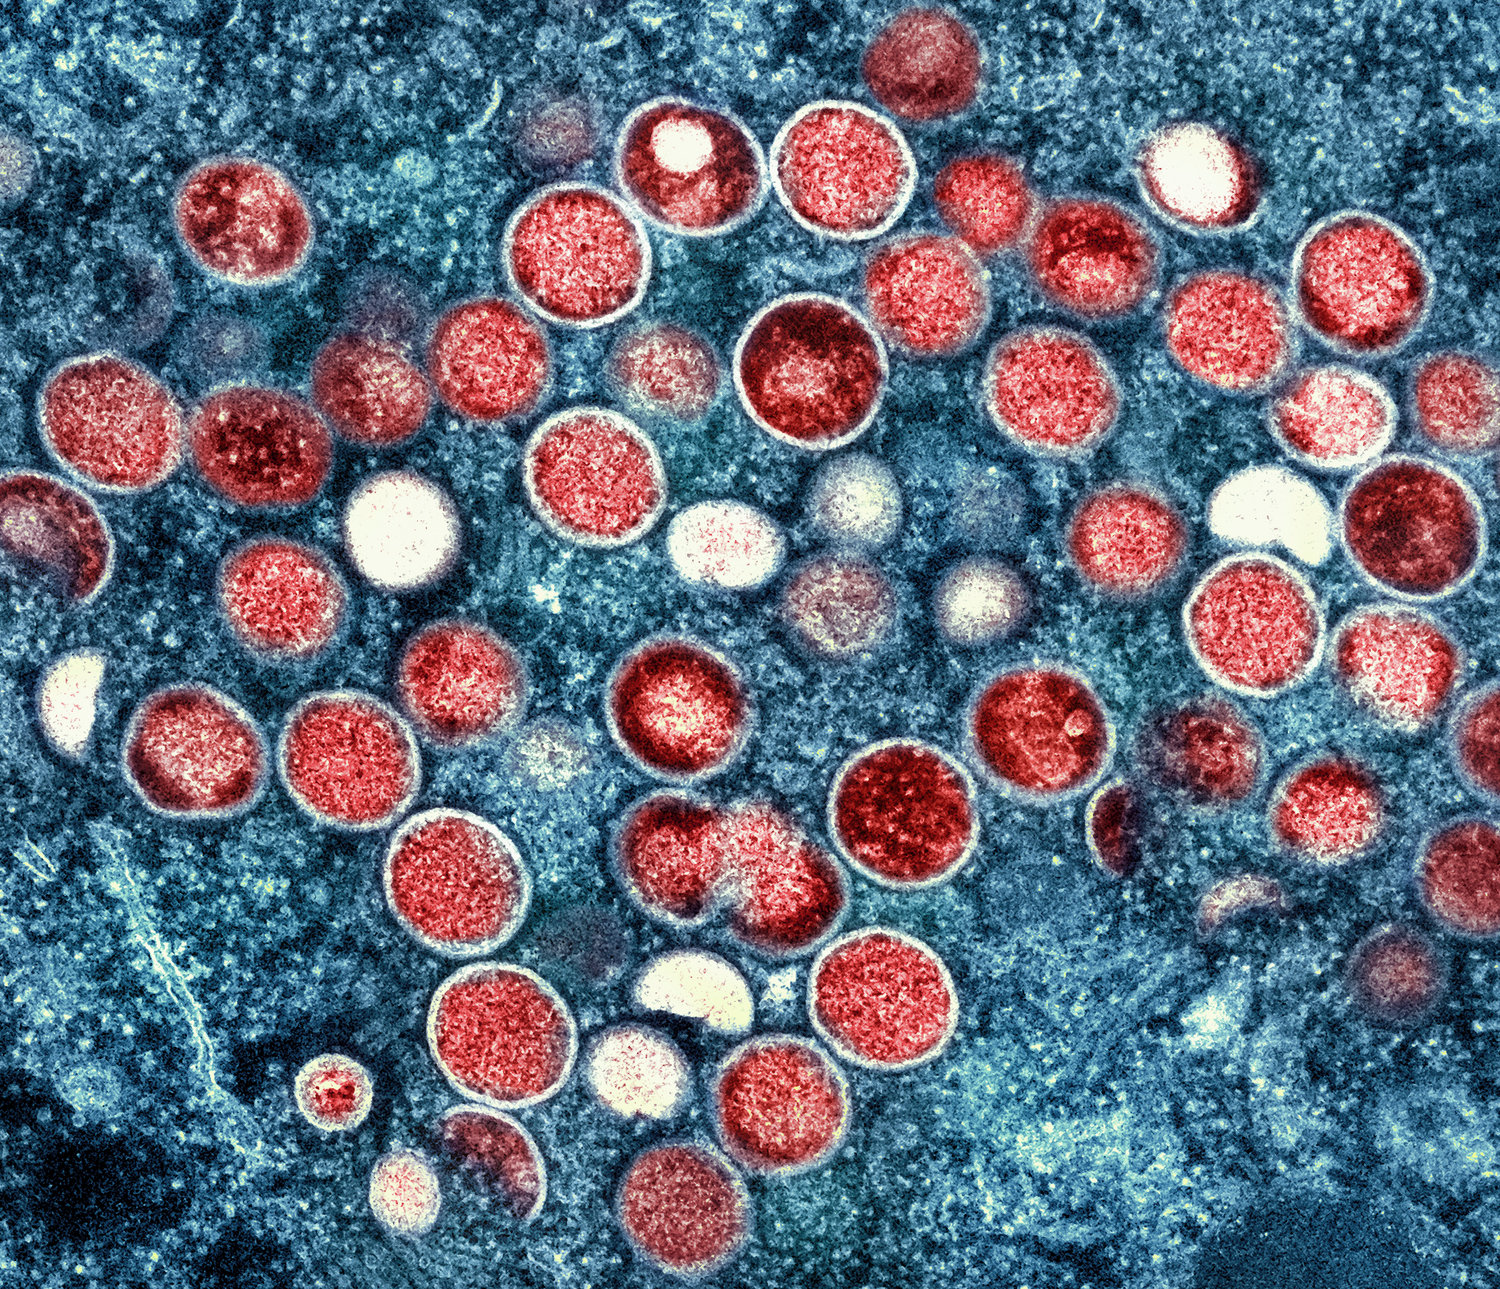 This image provided by the National Institute of Allergy and Infectious Diseases (NIAID) shows a colorized transmission electron micrograph of monkeypox particles (red) found within an infected cell (blue), cultured in the laboratory that was captured and color-enhanced at the NIAID Integrated Research Facility (IRF) in Fort Detrick, Md. The World Health Organization has renamed monkeypox as mpox, citing concerns the original name of the decades-old animal disease could be construed as discriminatory and racist.